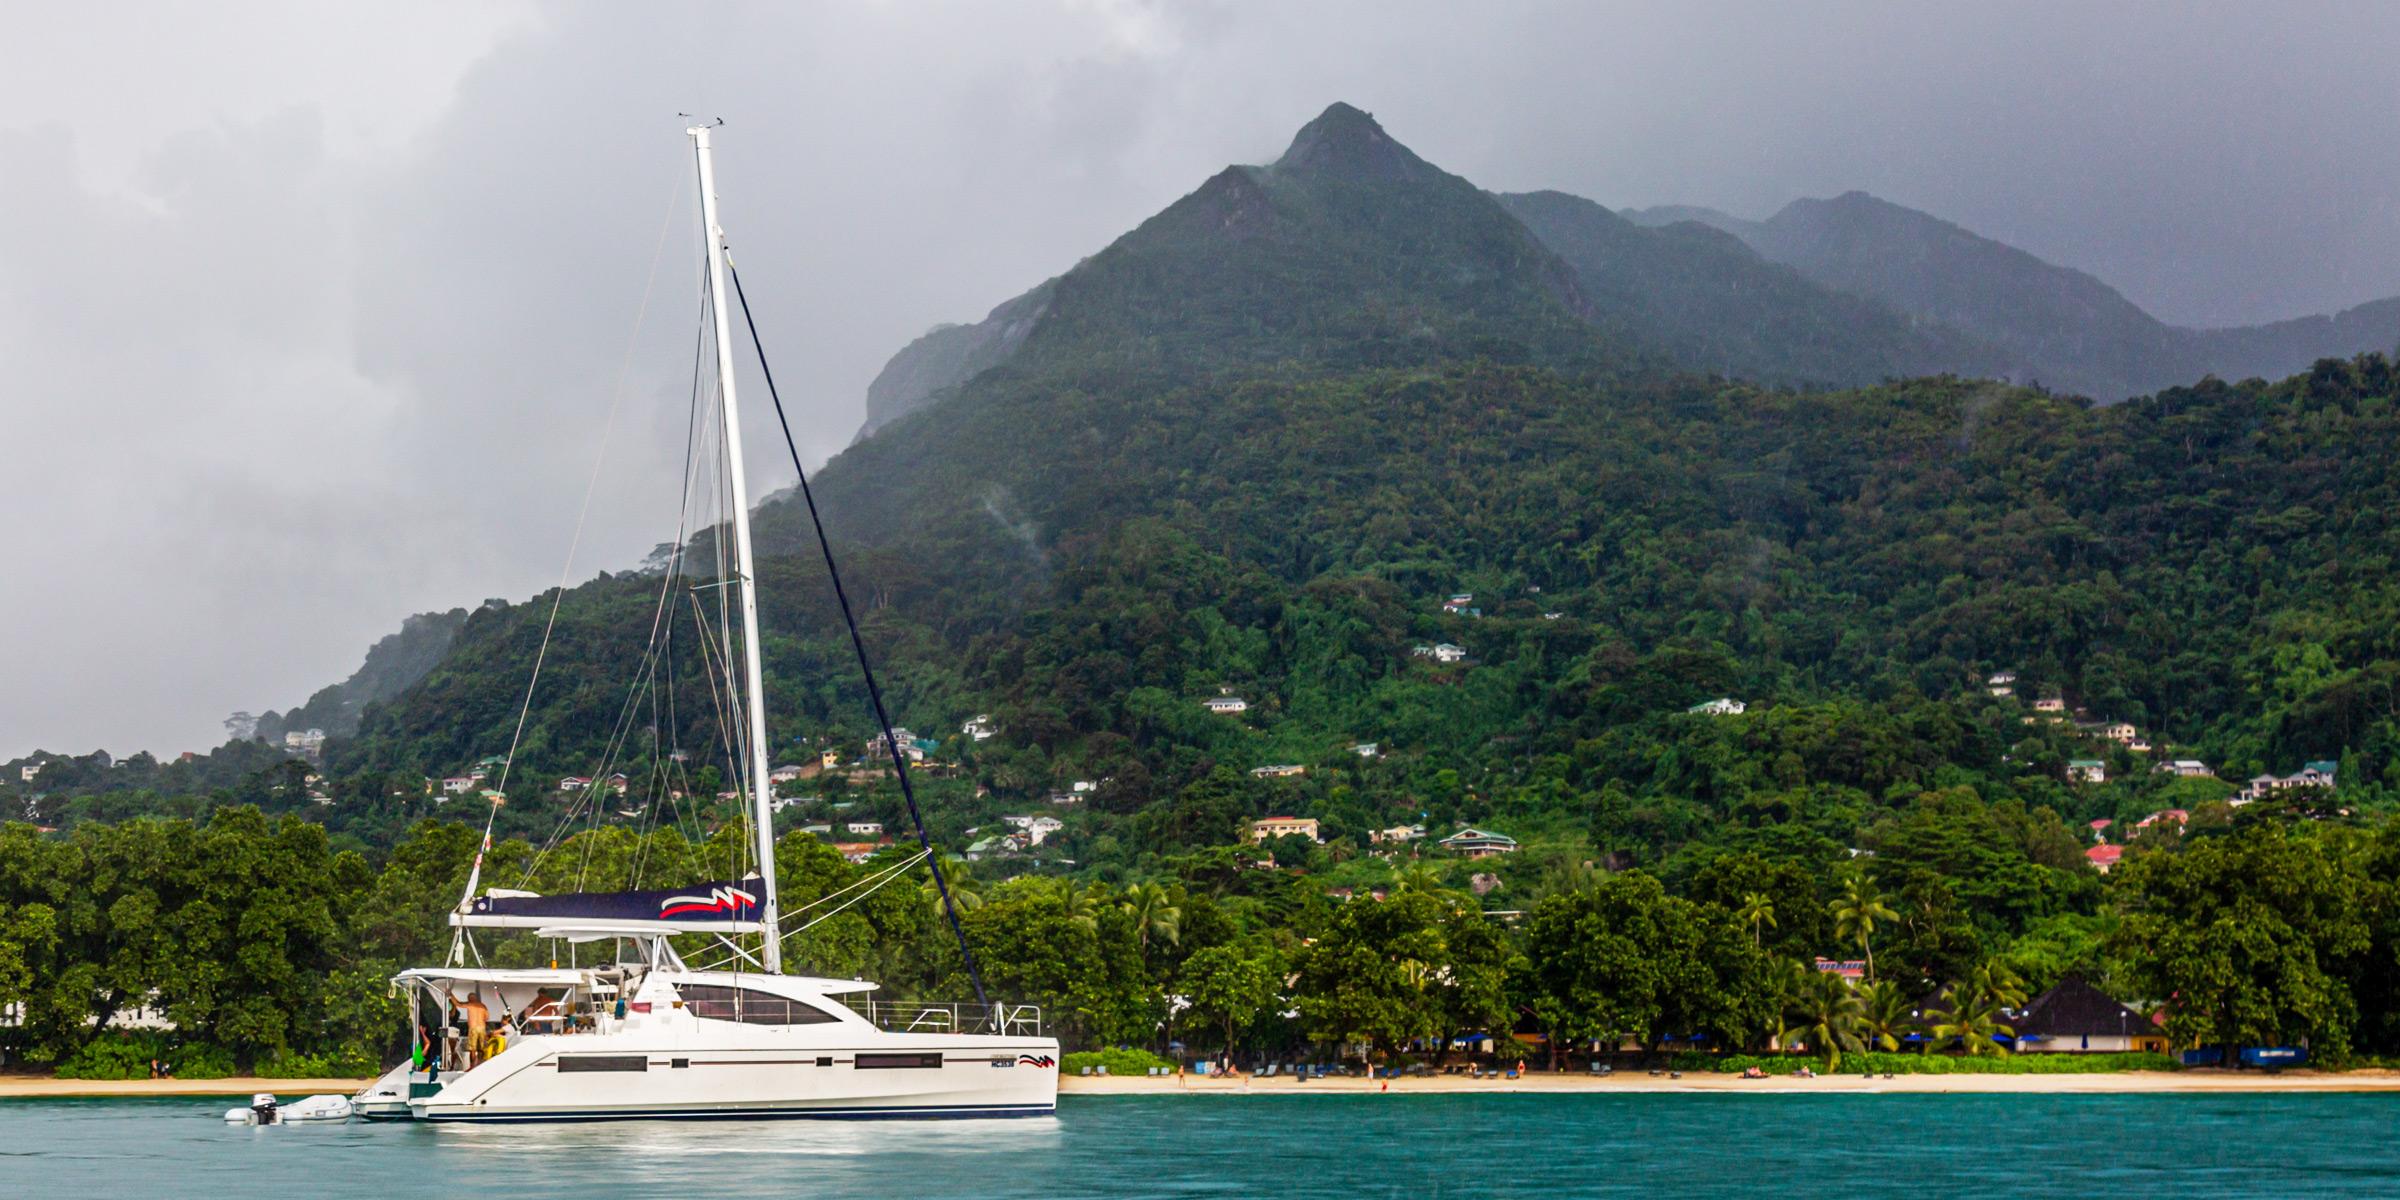 Moorings 4800 anchoring in the Seychelles